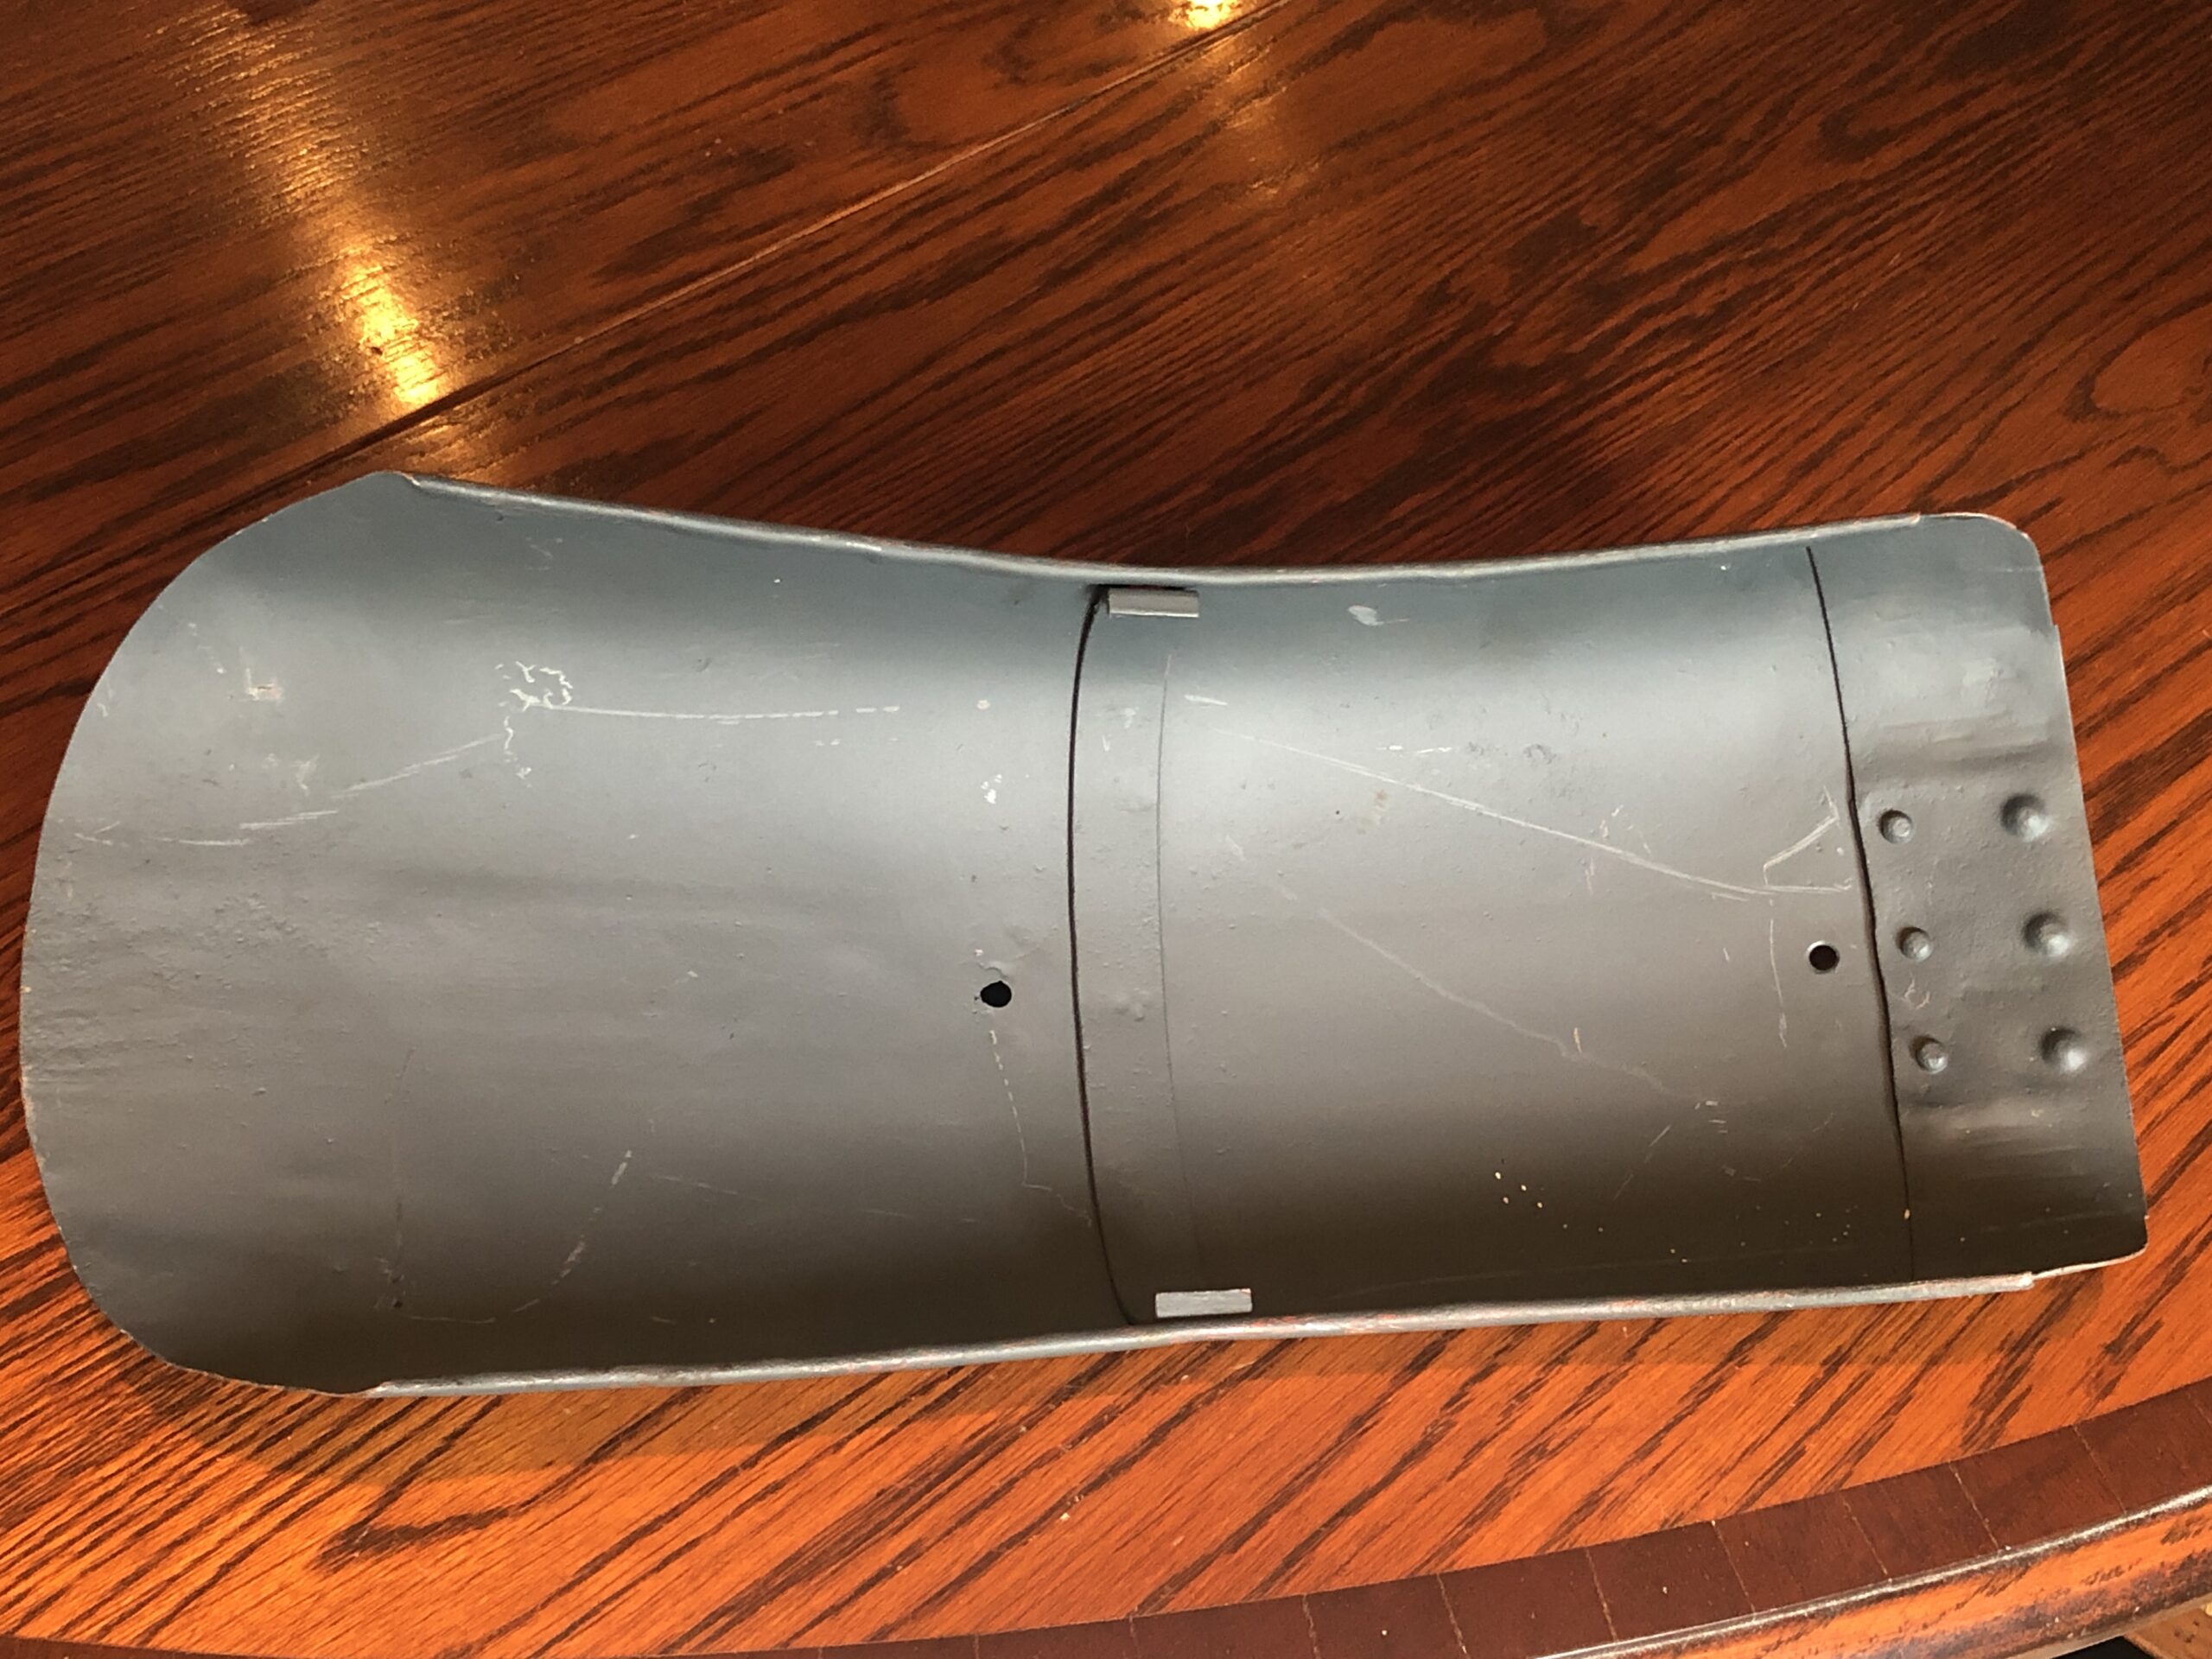 1930s DKW SB500 ORIGINAL rear fender hinged section. Vintage prewar DKW SB500 spare parts for sale. Rear mudguard section for this rare two stroke motorcycle